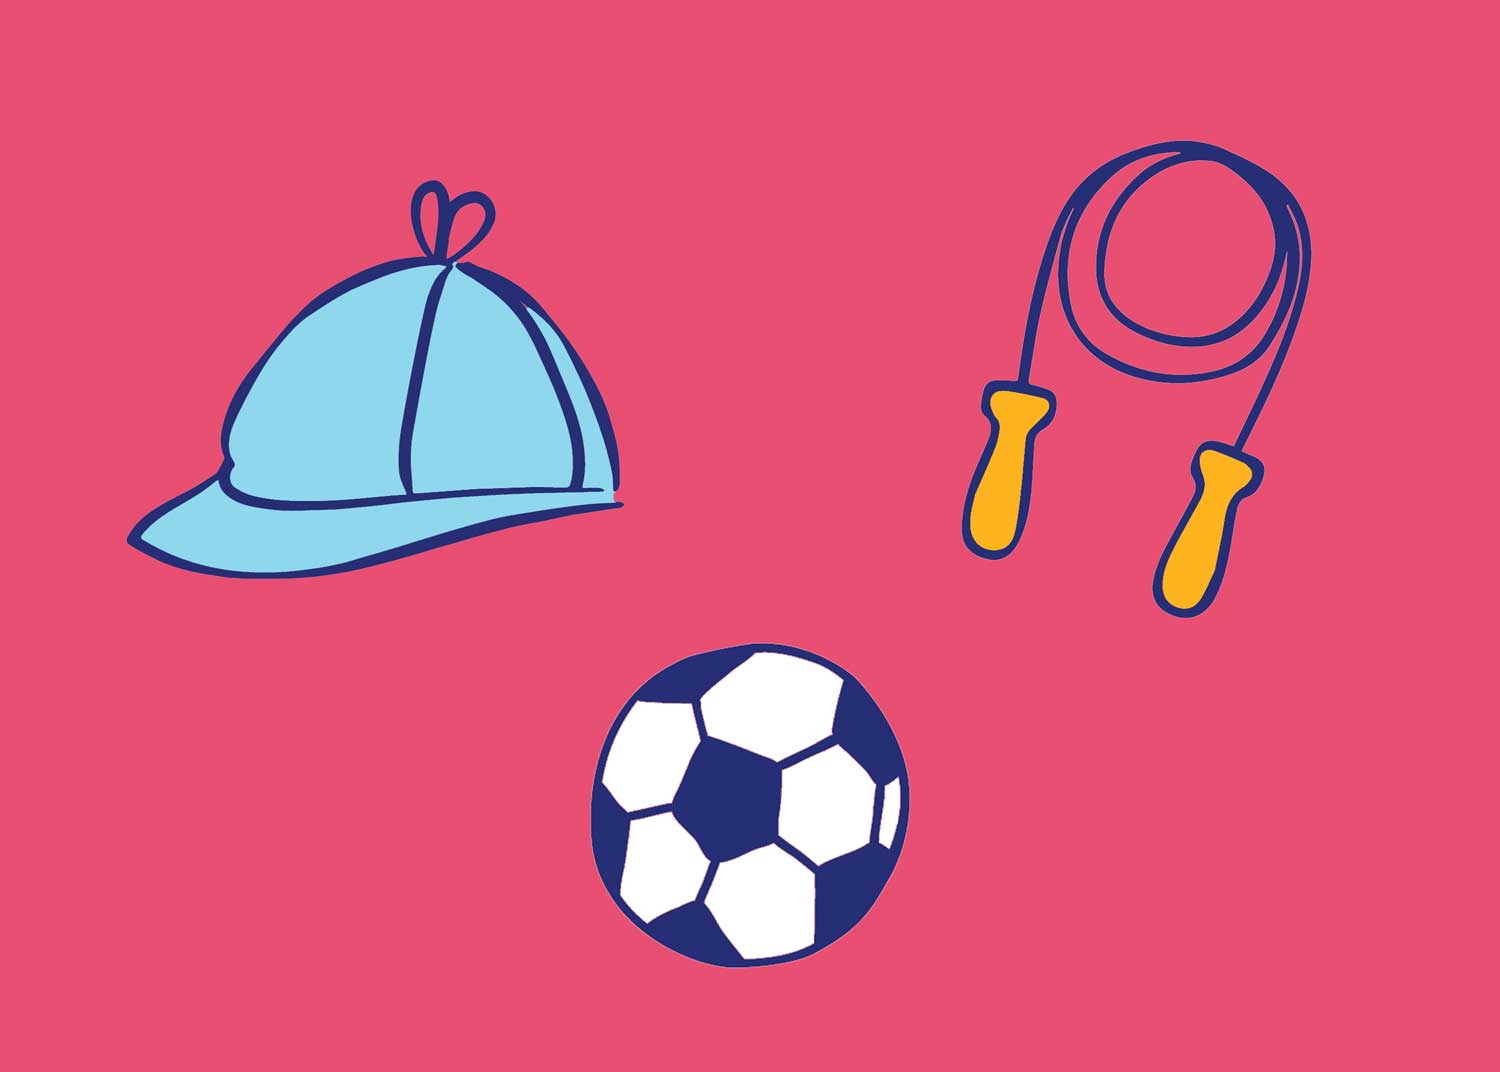 Colourful illustrations of a football, a cap and a skipping rope.